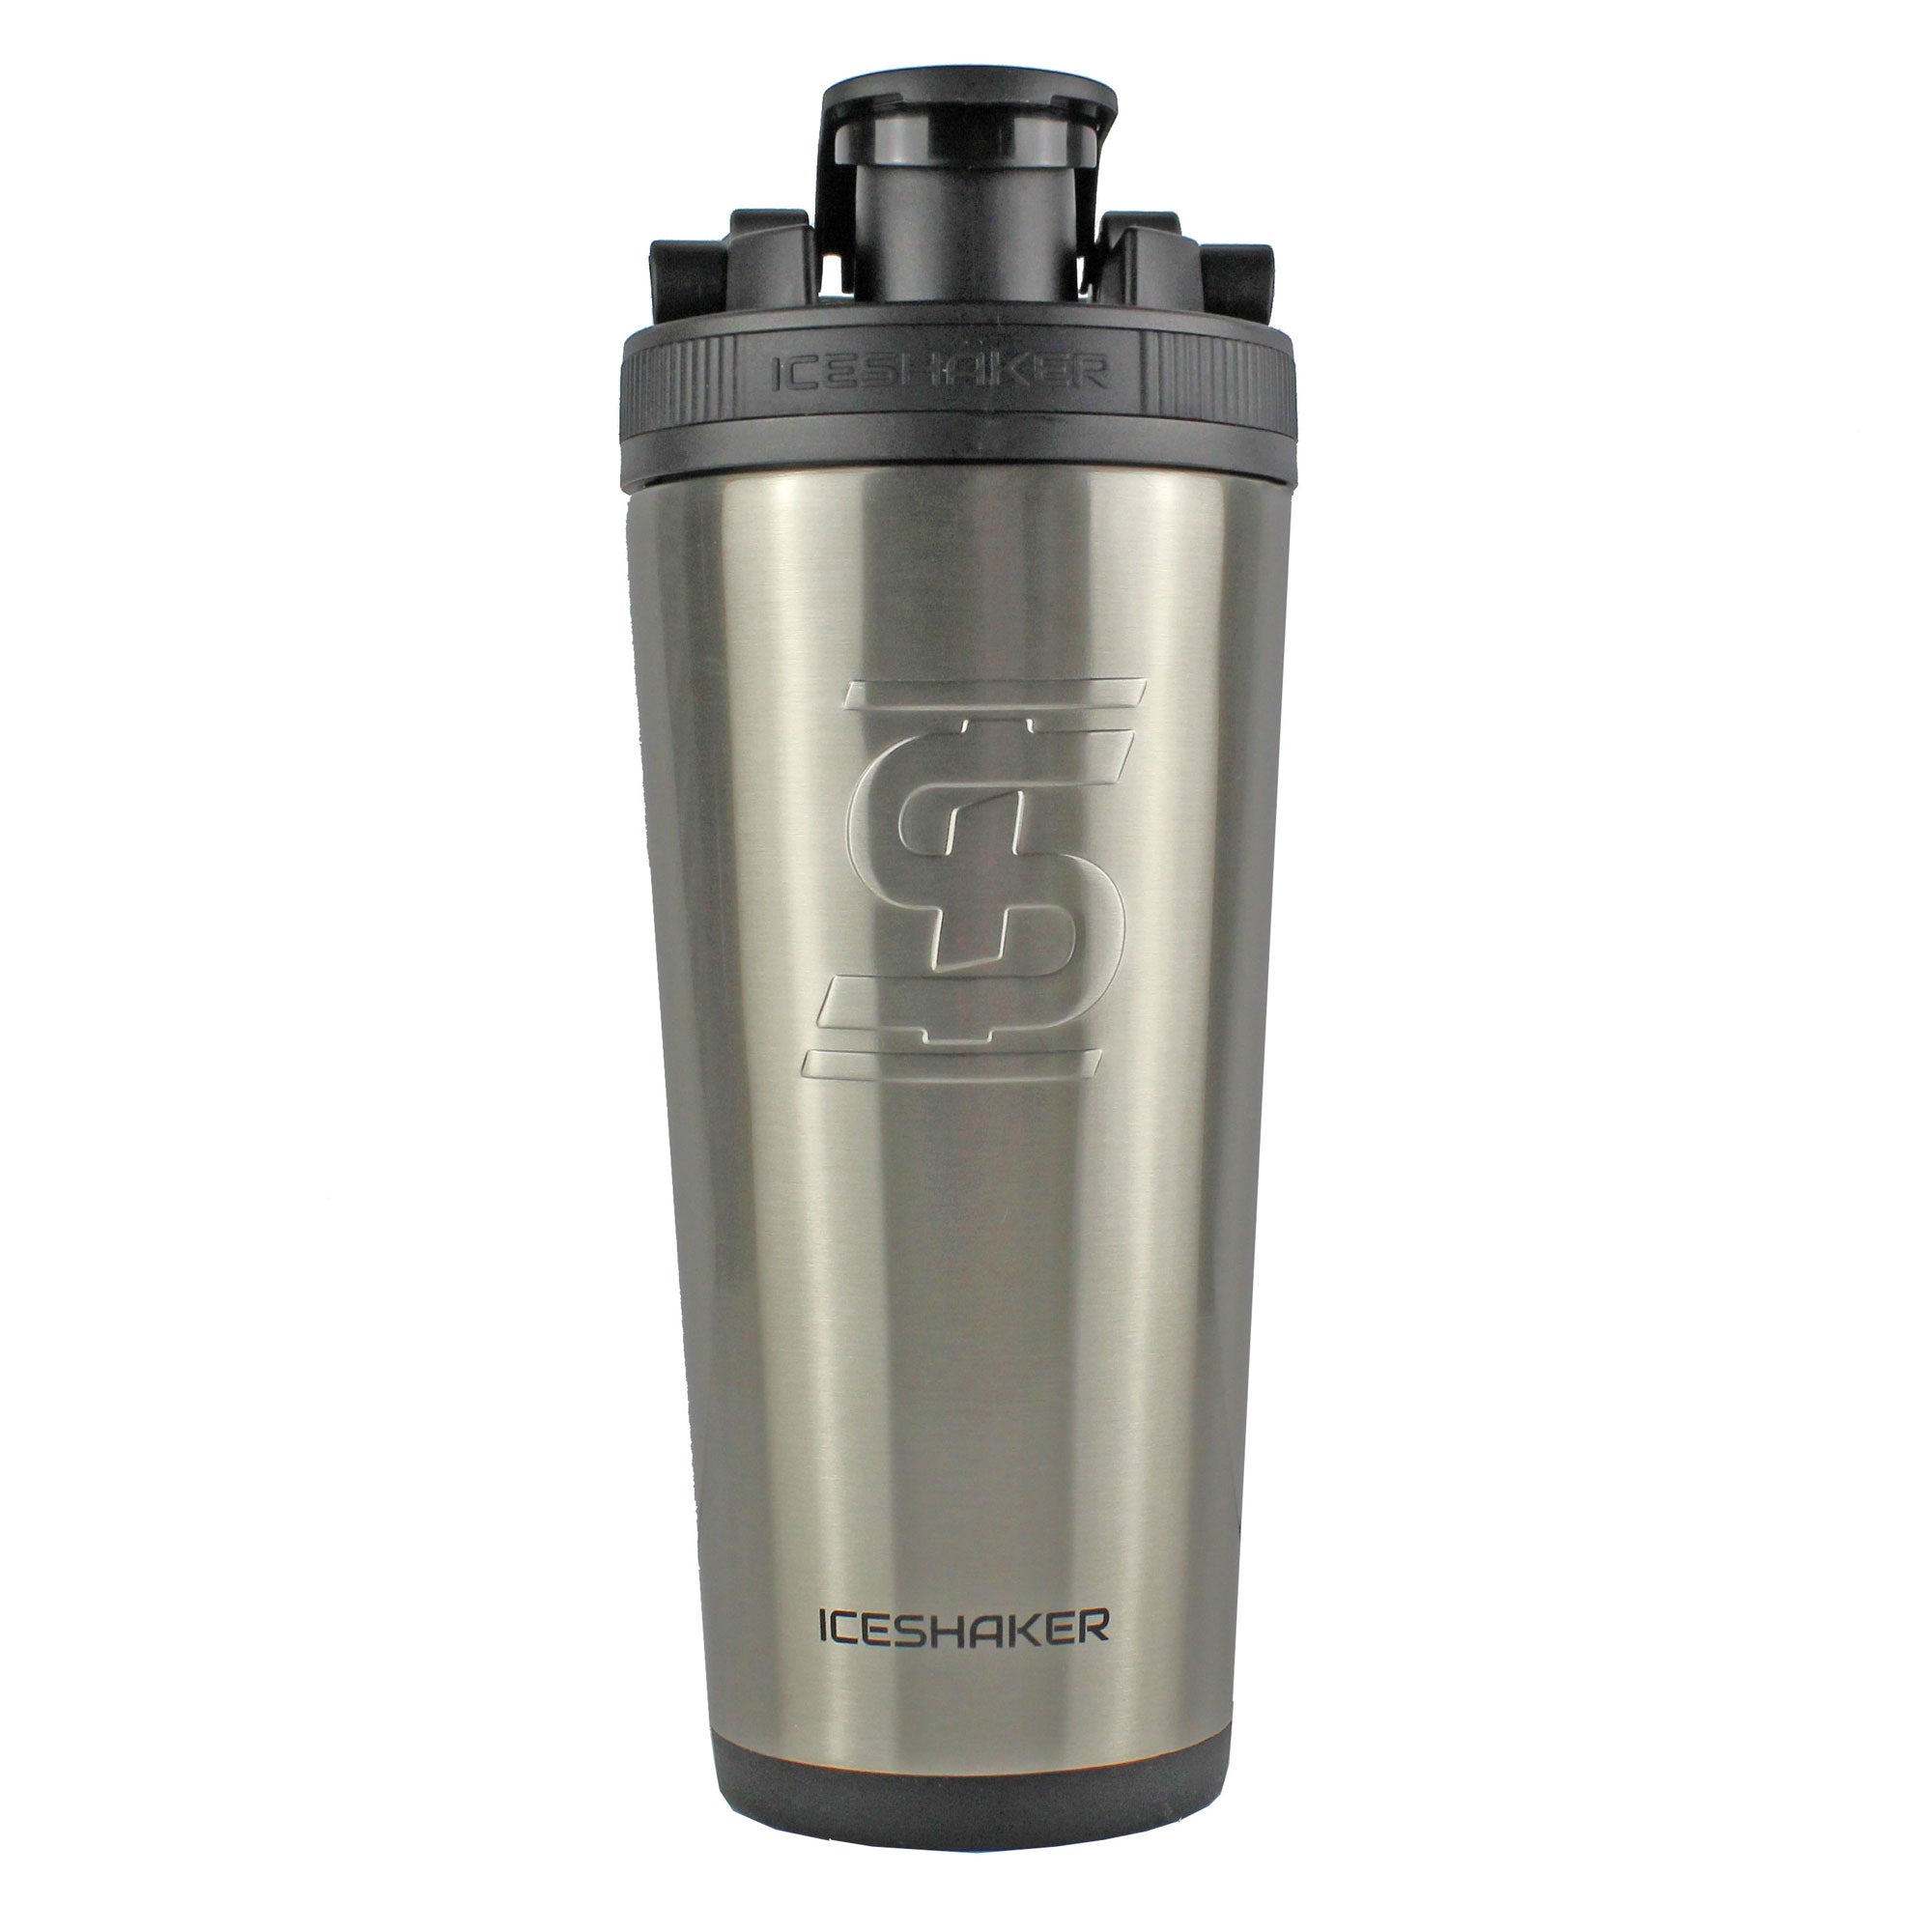 26oz Ice Shaker - Stainless Steel